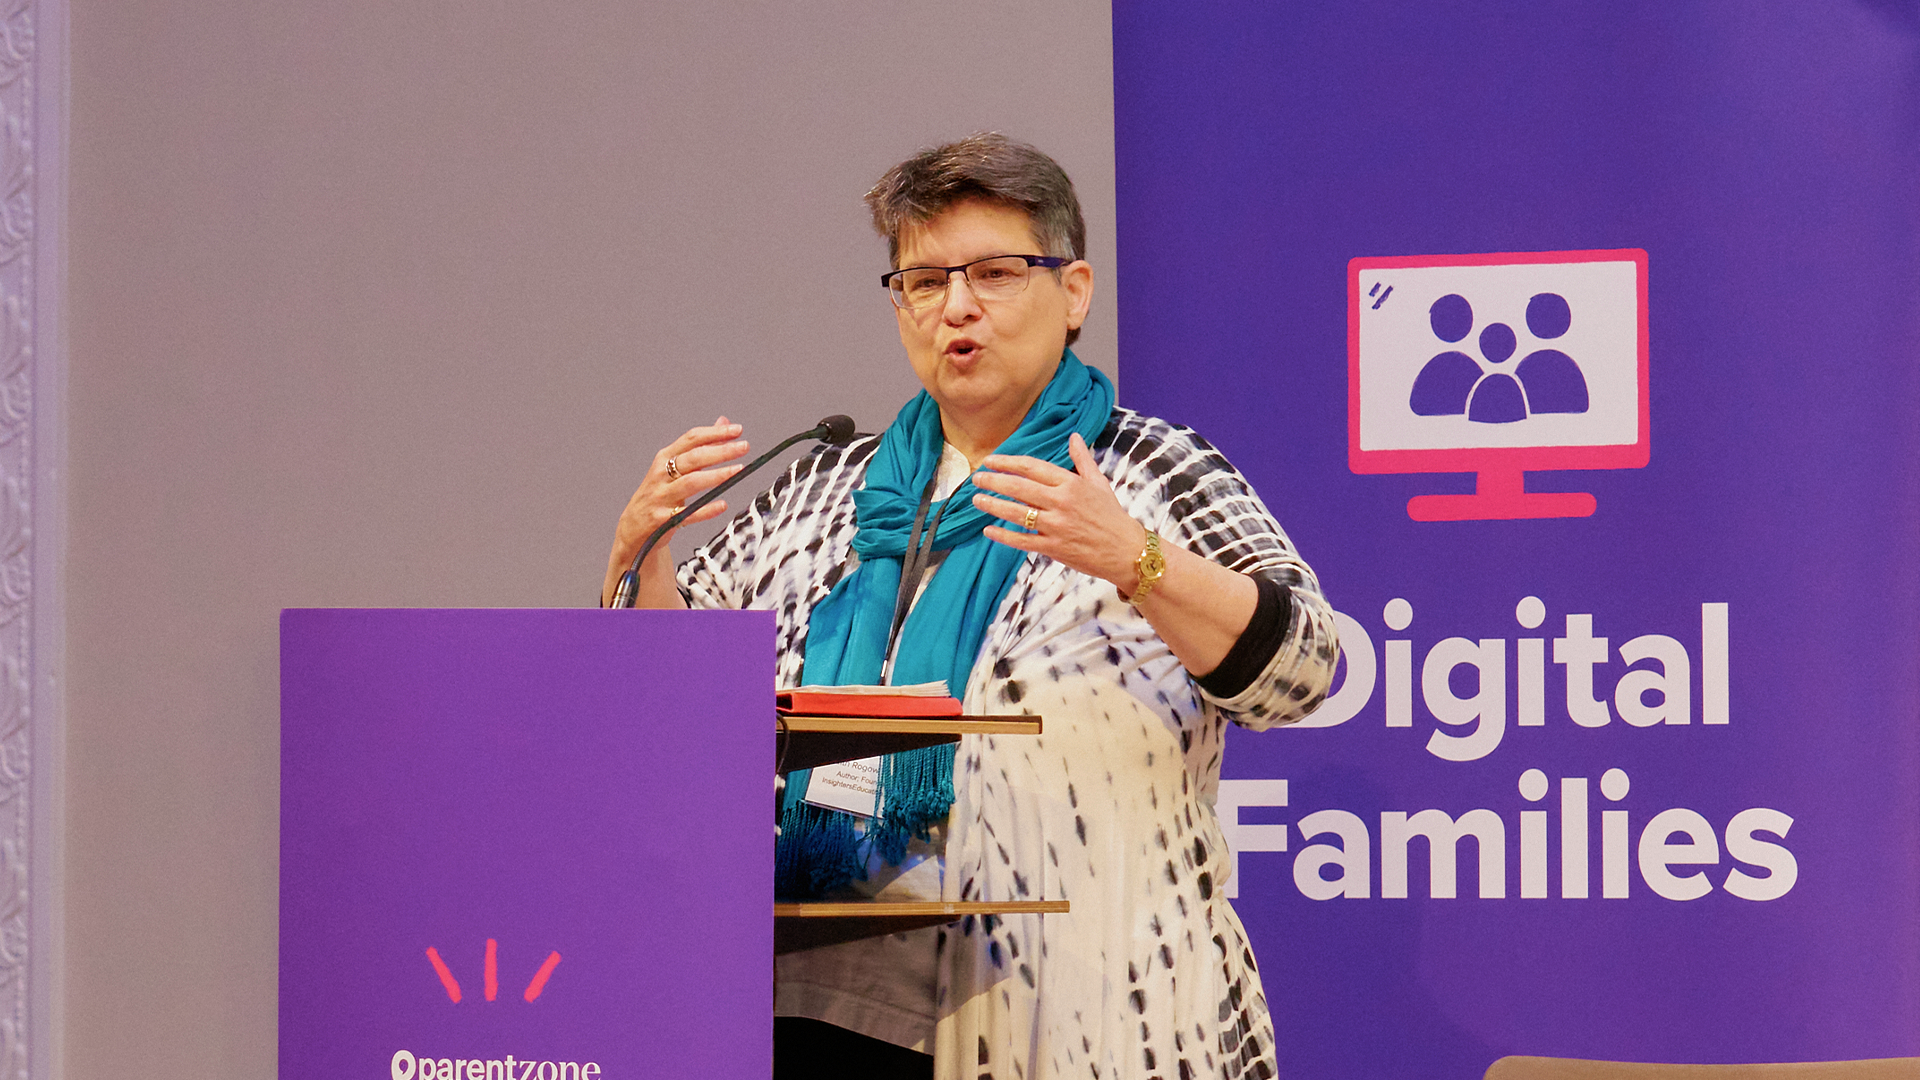 Watch Faith Rogow's session on media literacy at Digital Families 2022